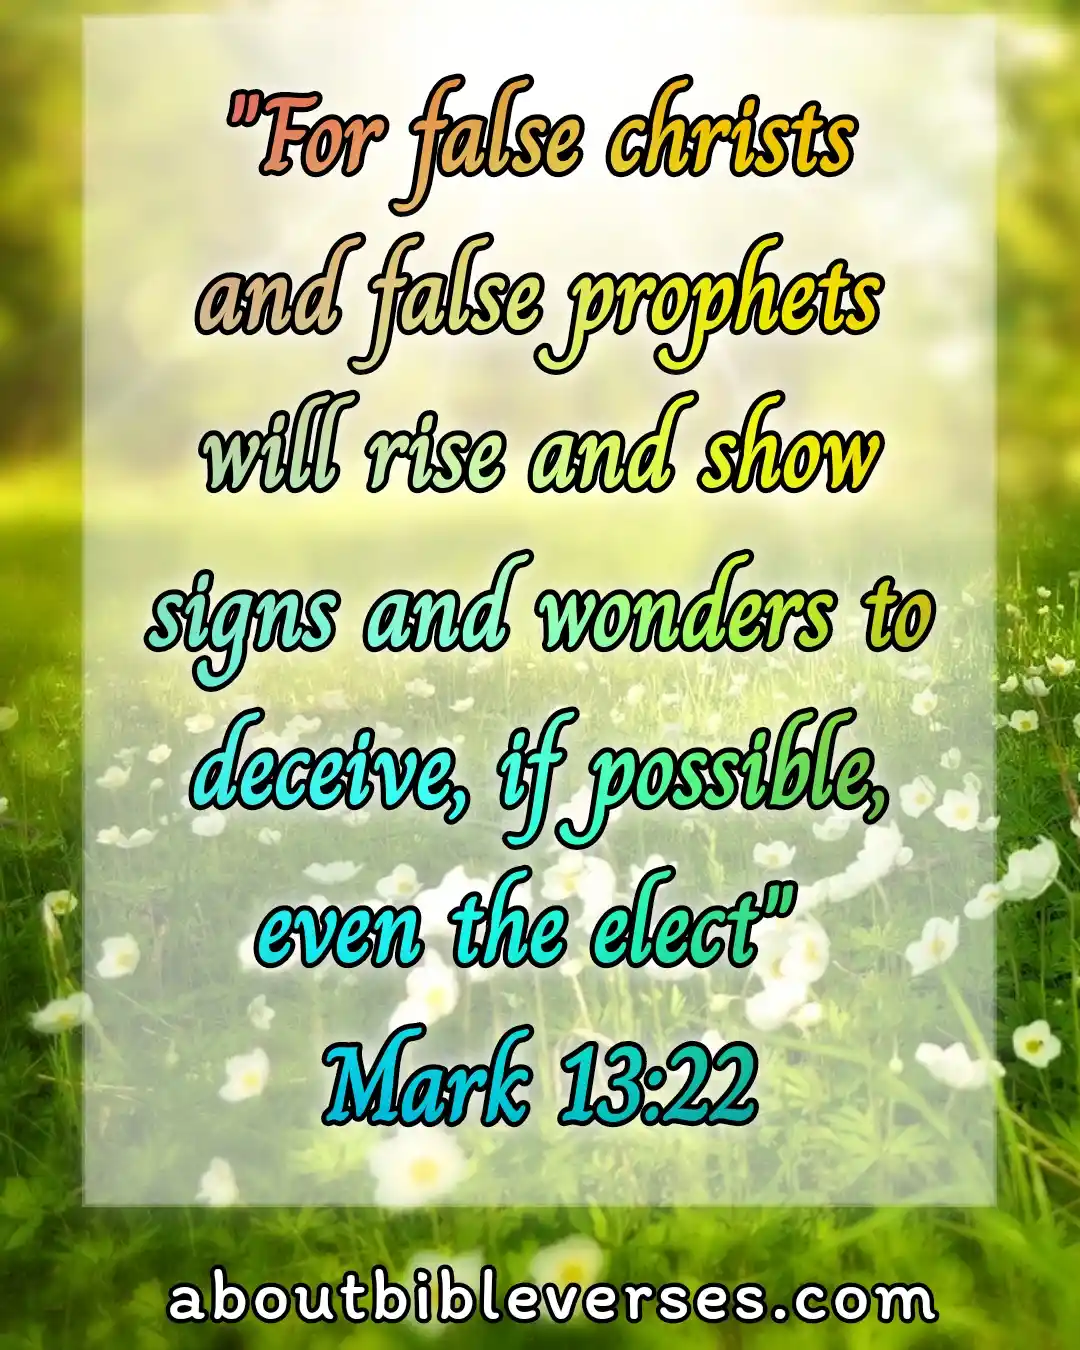 bible verse about deception in the last days (Mark 13:22)